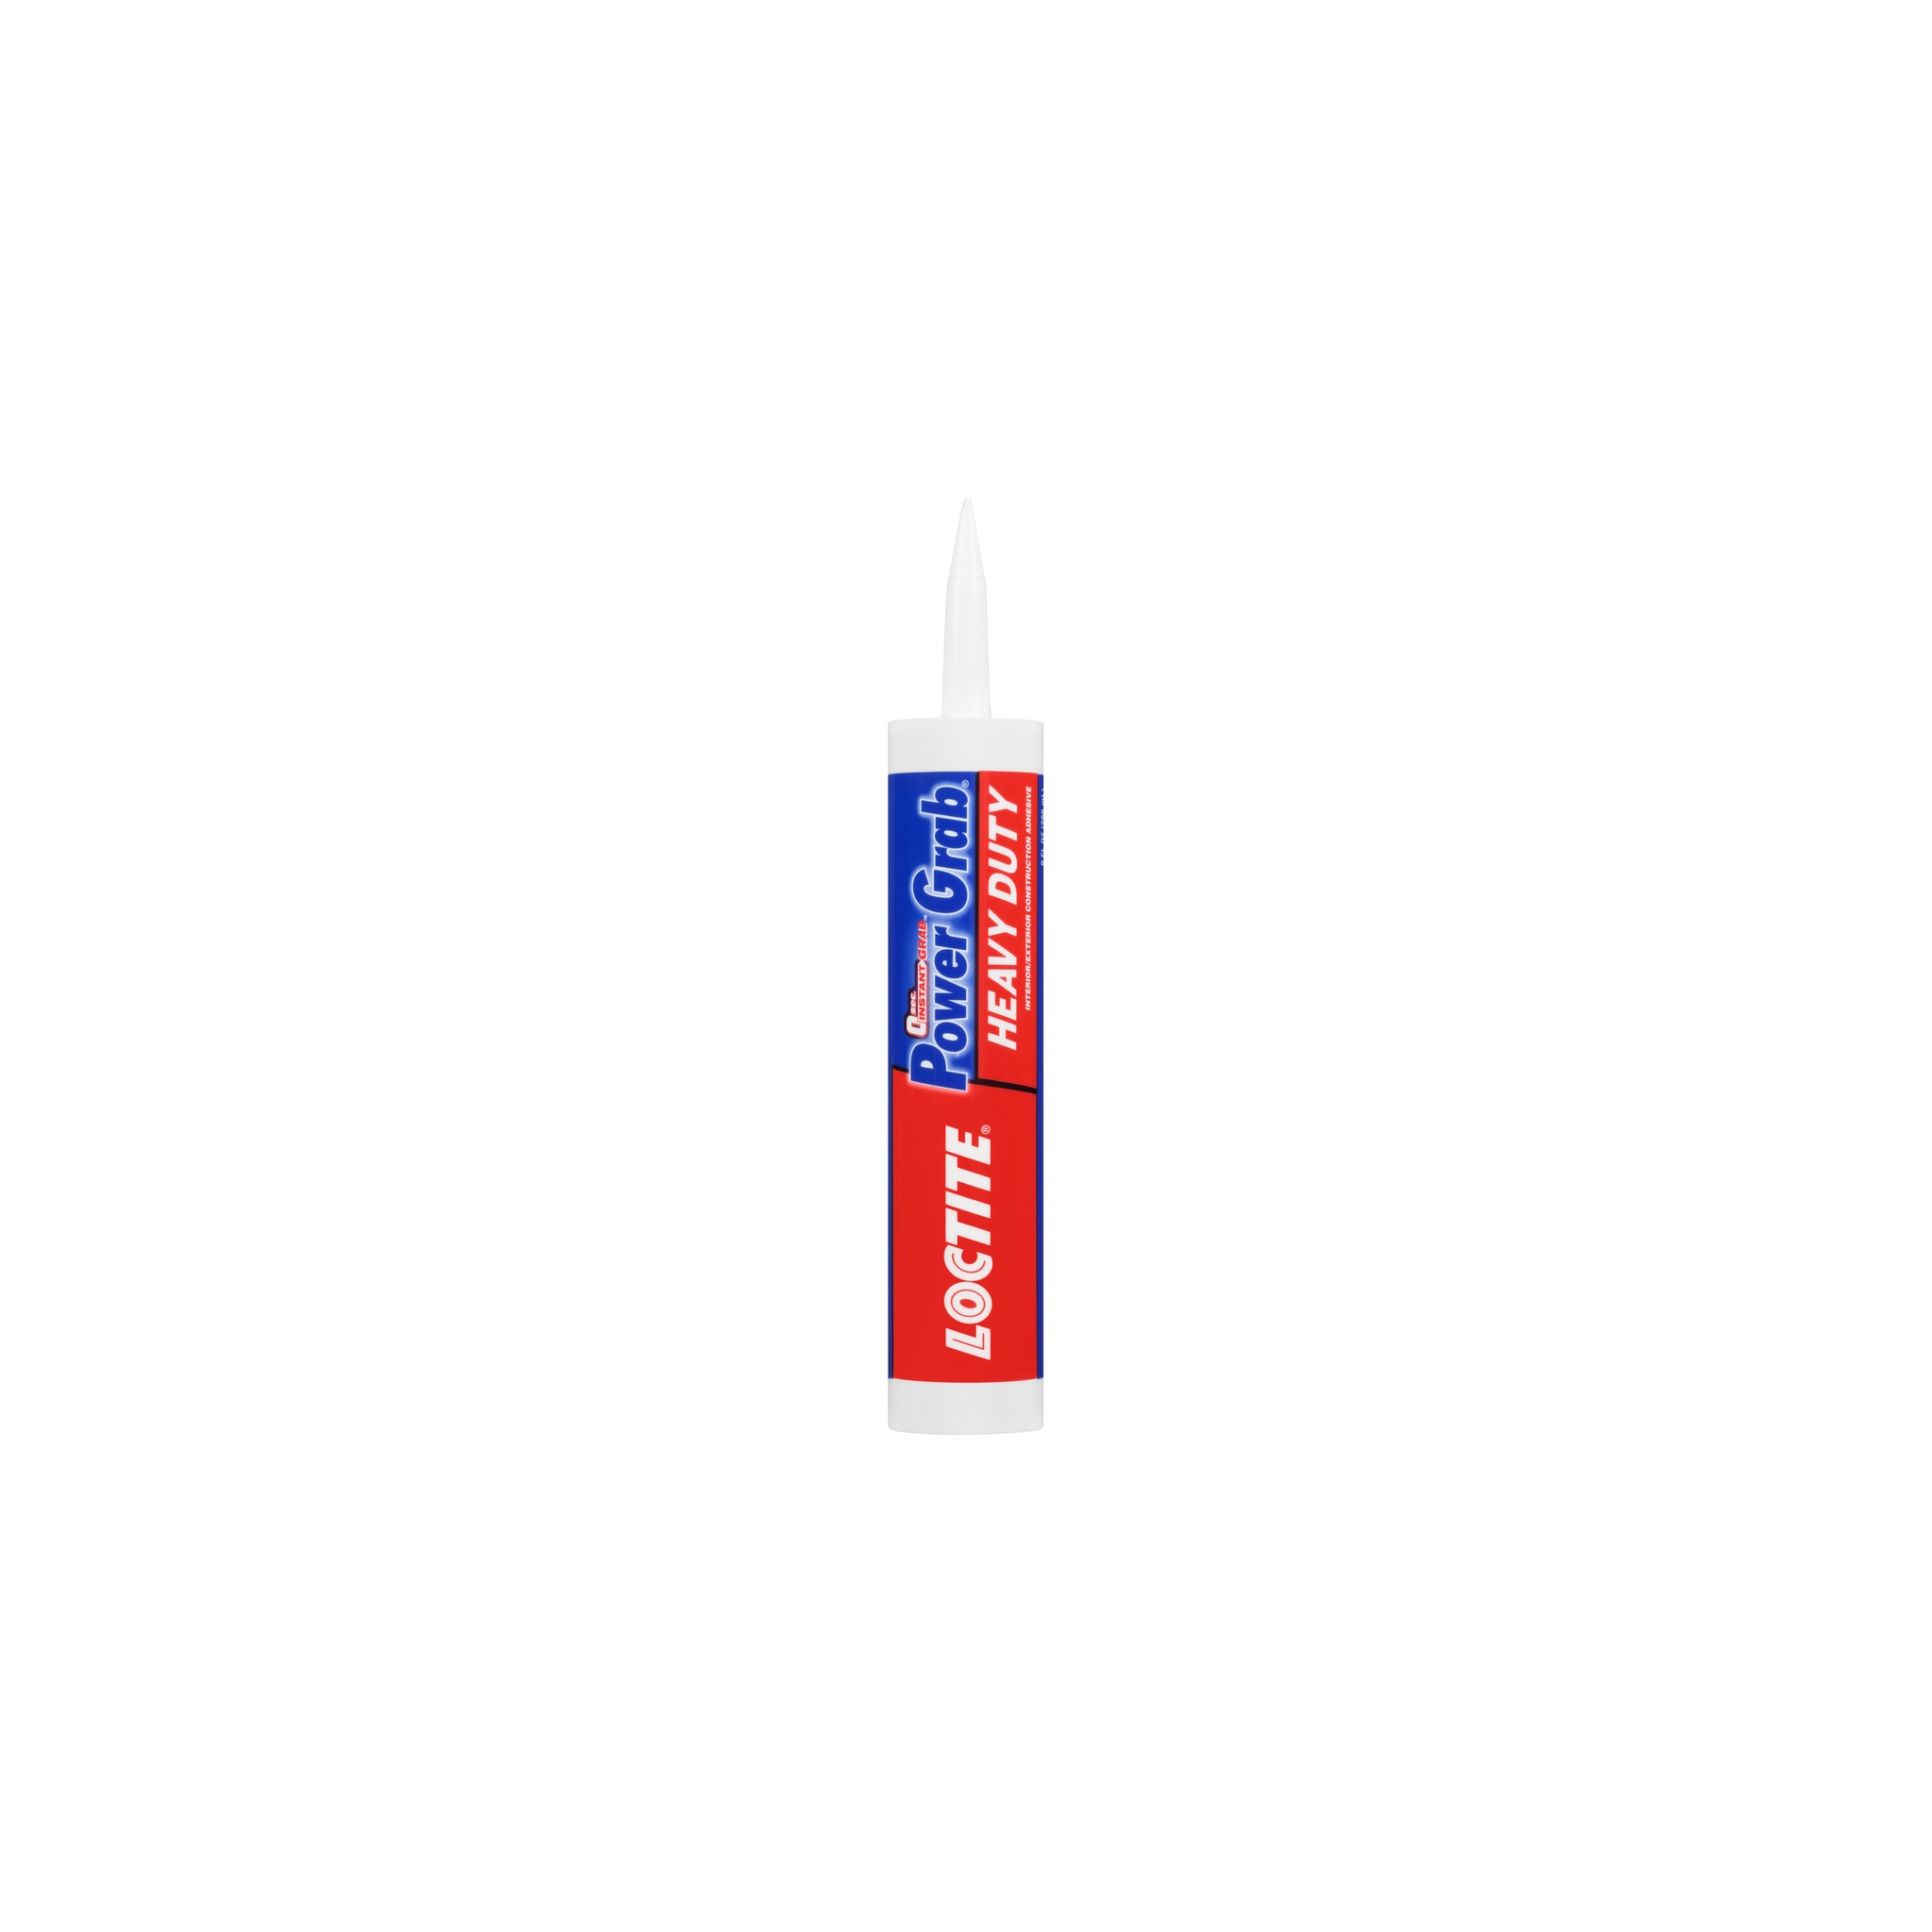 Loctite® Power Grab Adhesive - Acoustical Solutions